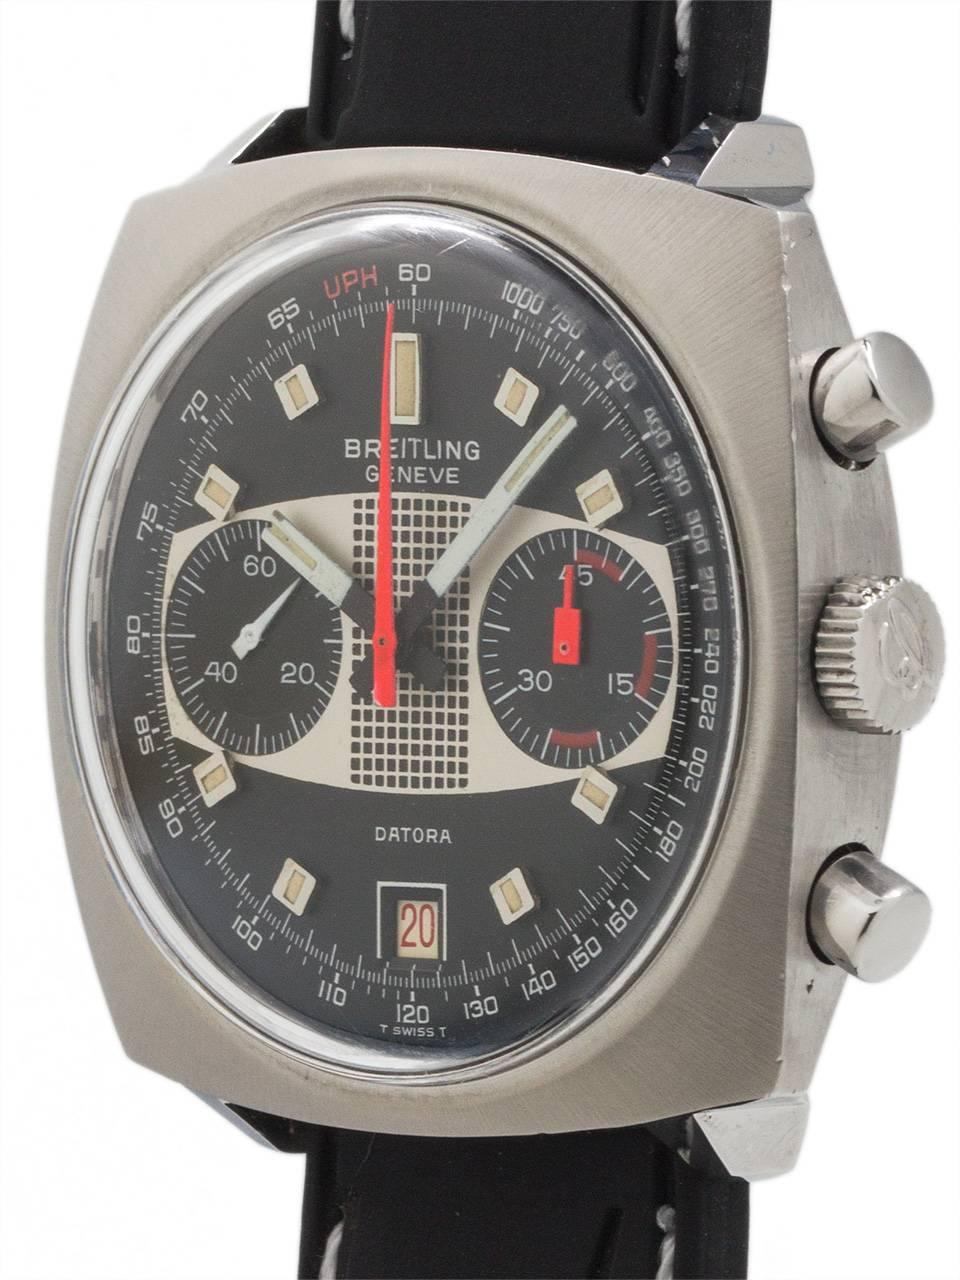 Vintage Breitling stainless steel manual wind chrongraph ref 2030 circa 1970. Featuring a very sharp condition 38 X 41mm cushion shaped case. With beautiful black dial with stylized elliptical race track pattern. Fluorescent orange chronograph